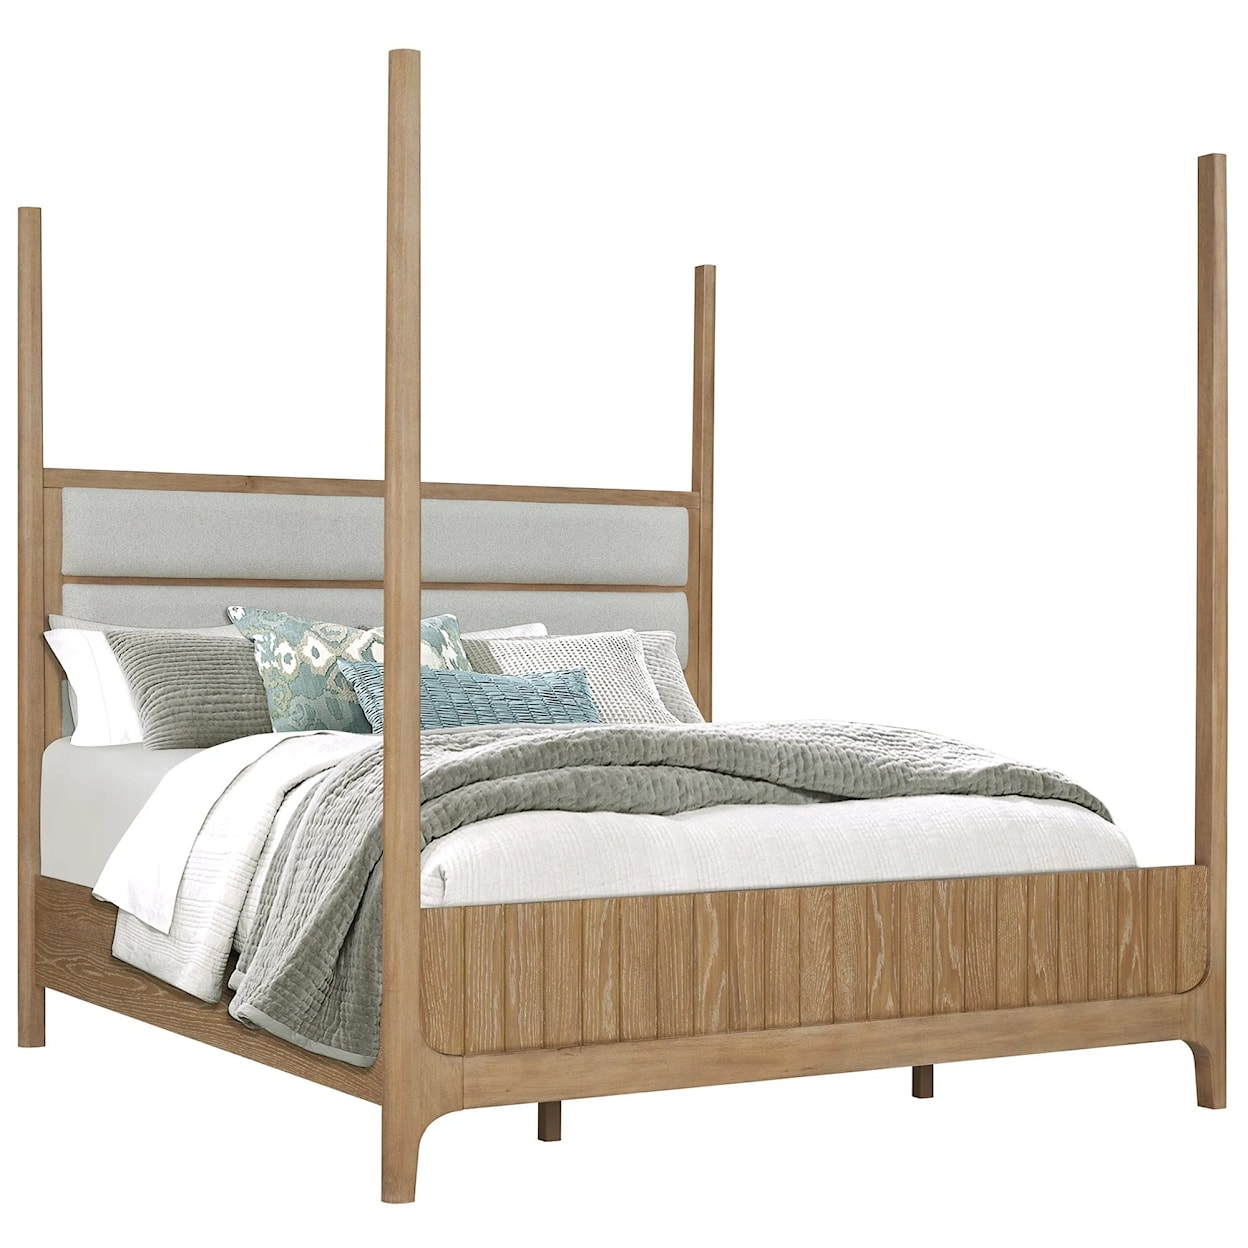 PH Escape King Poster Bed